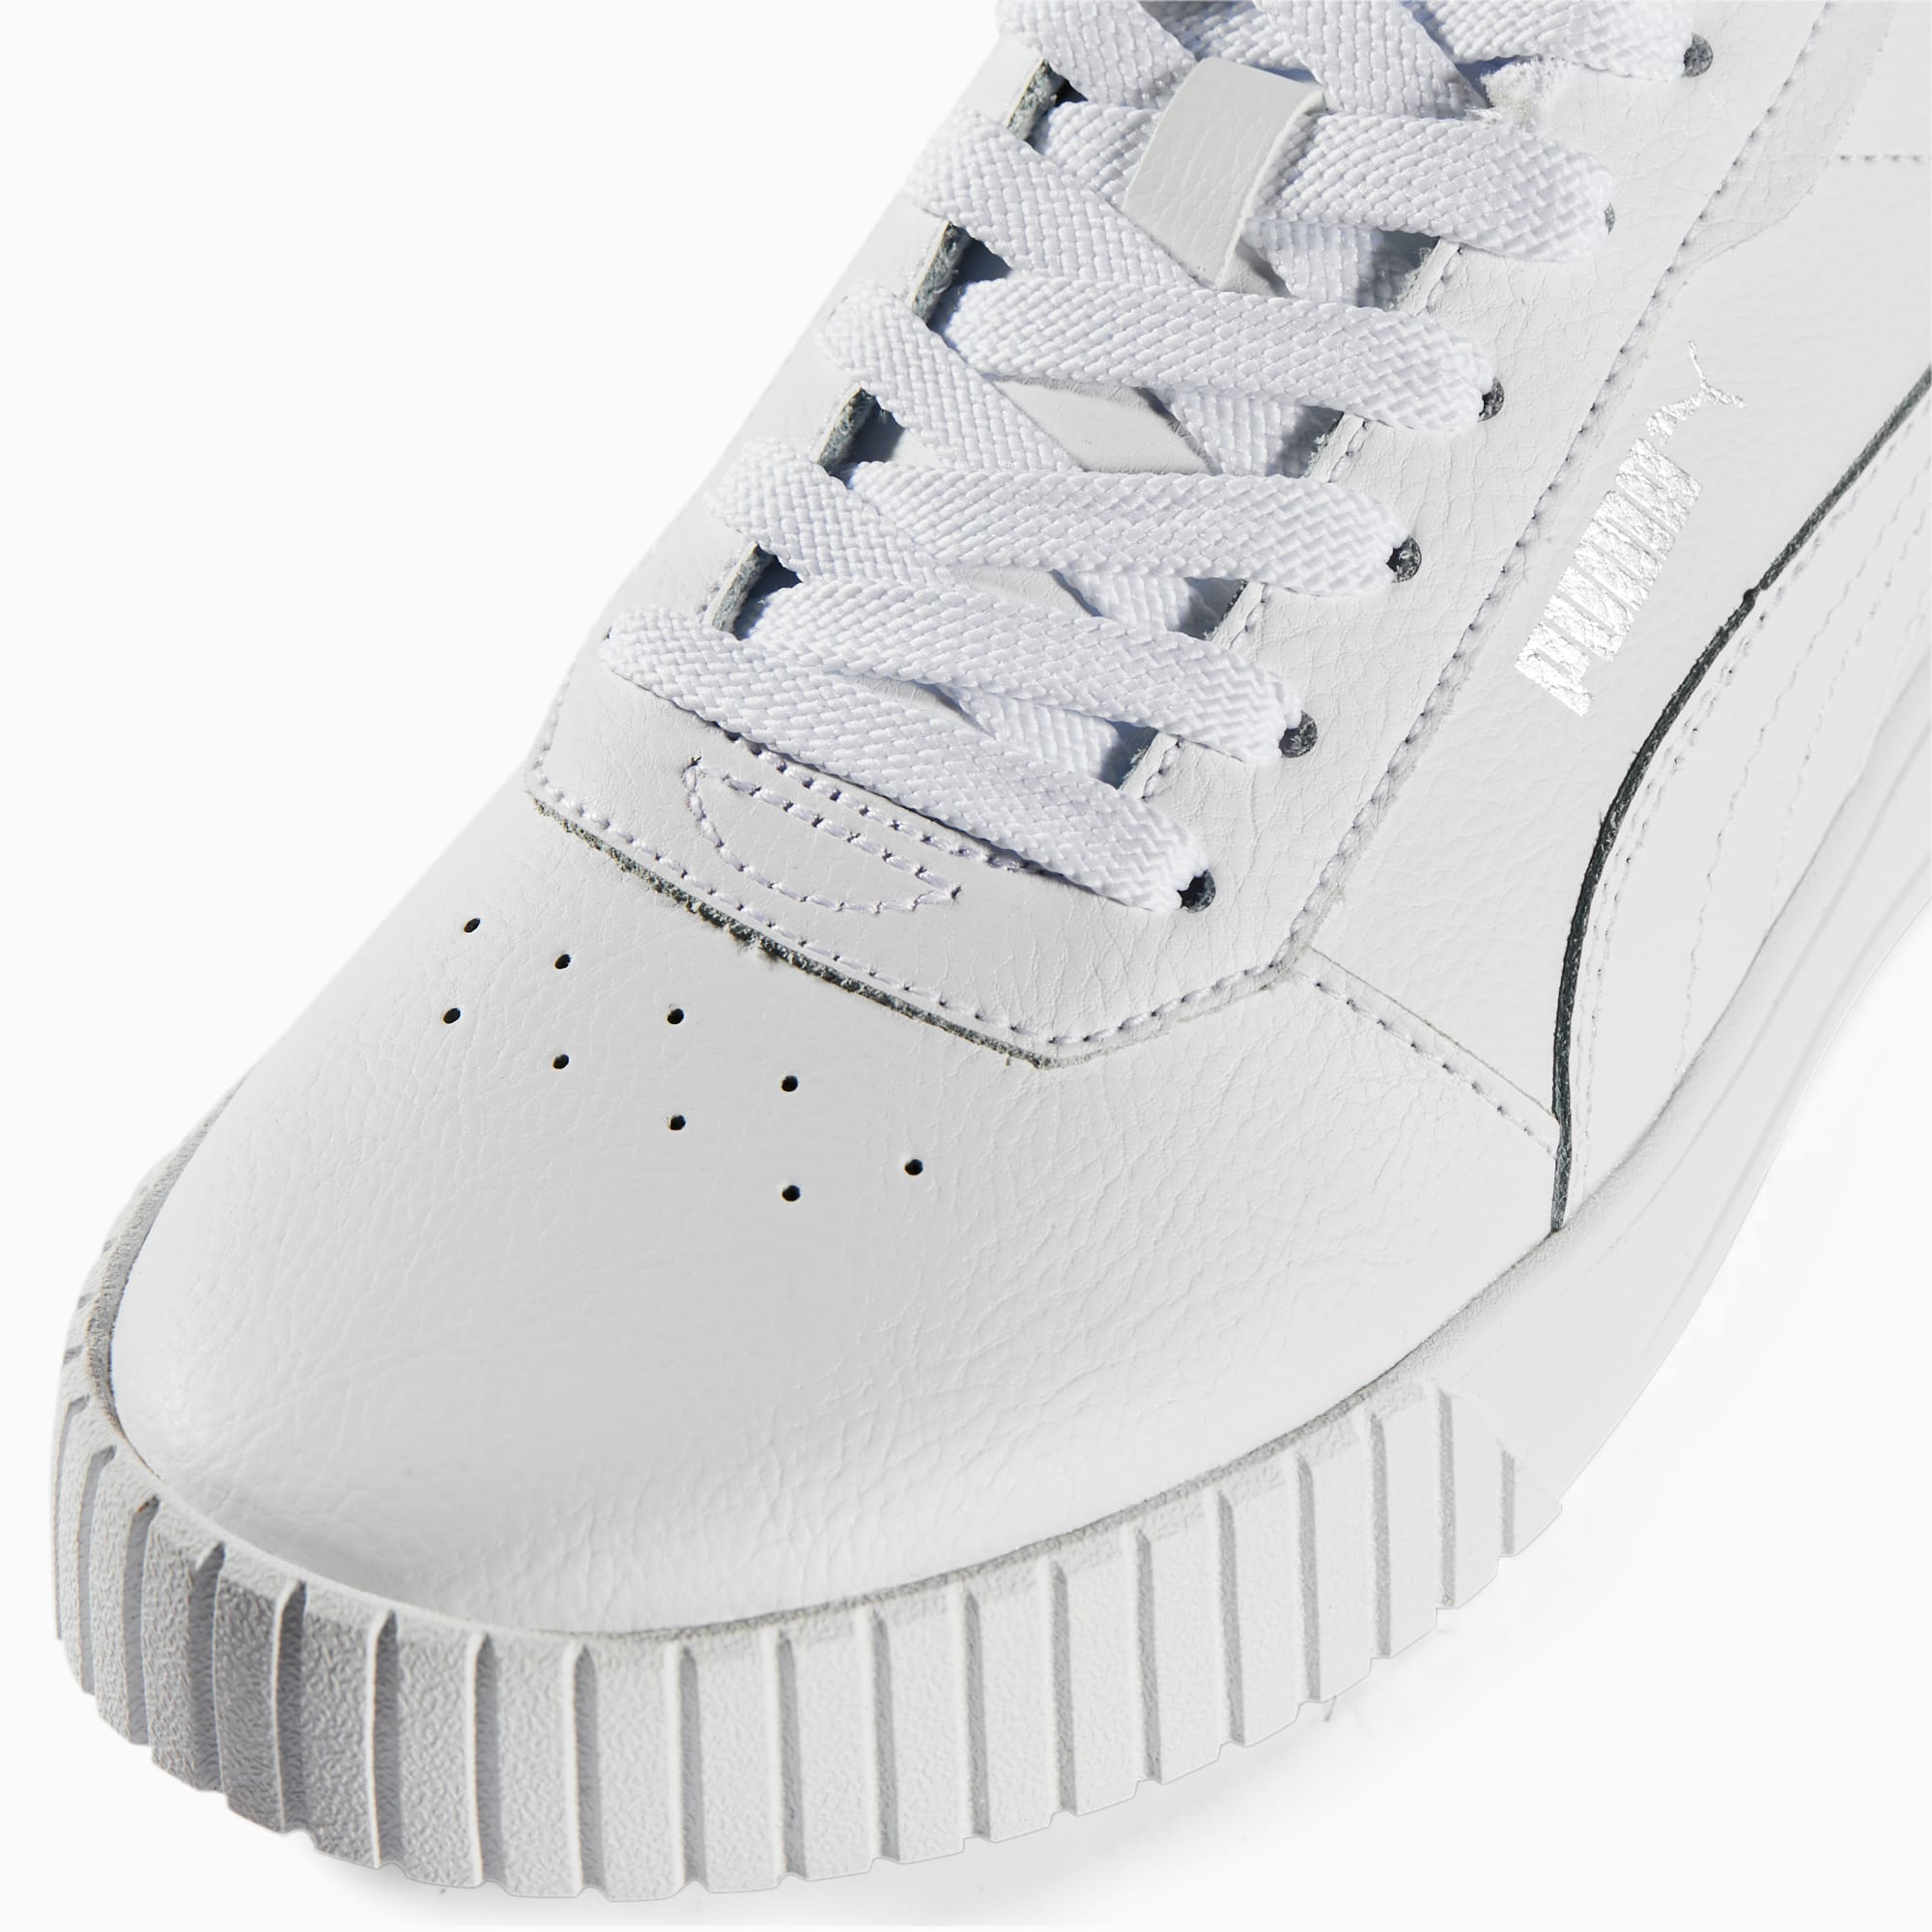 PUMA Chaussure Sneakers Carina 2.0 Femme, Blanc/Argent